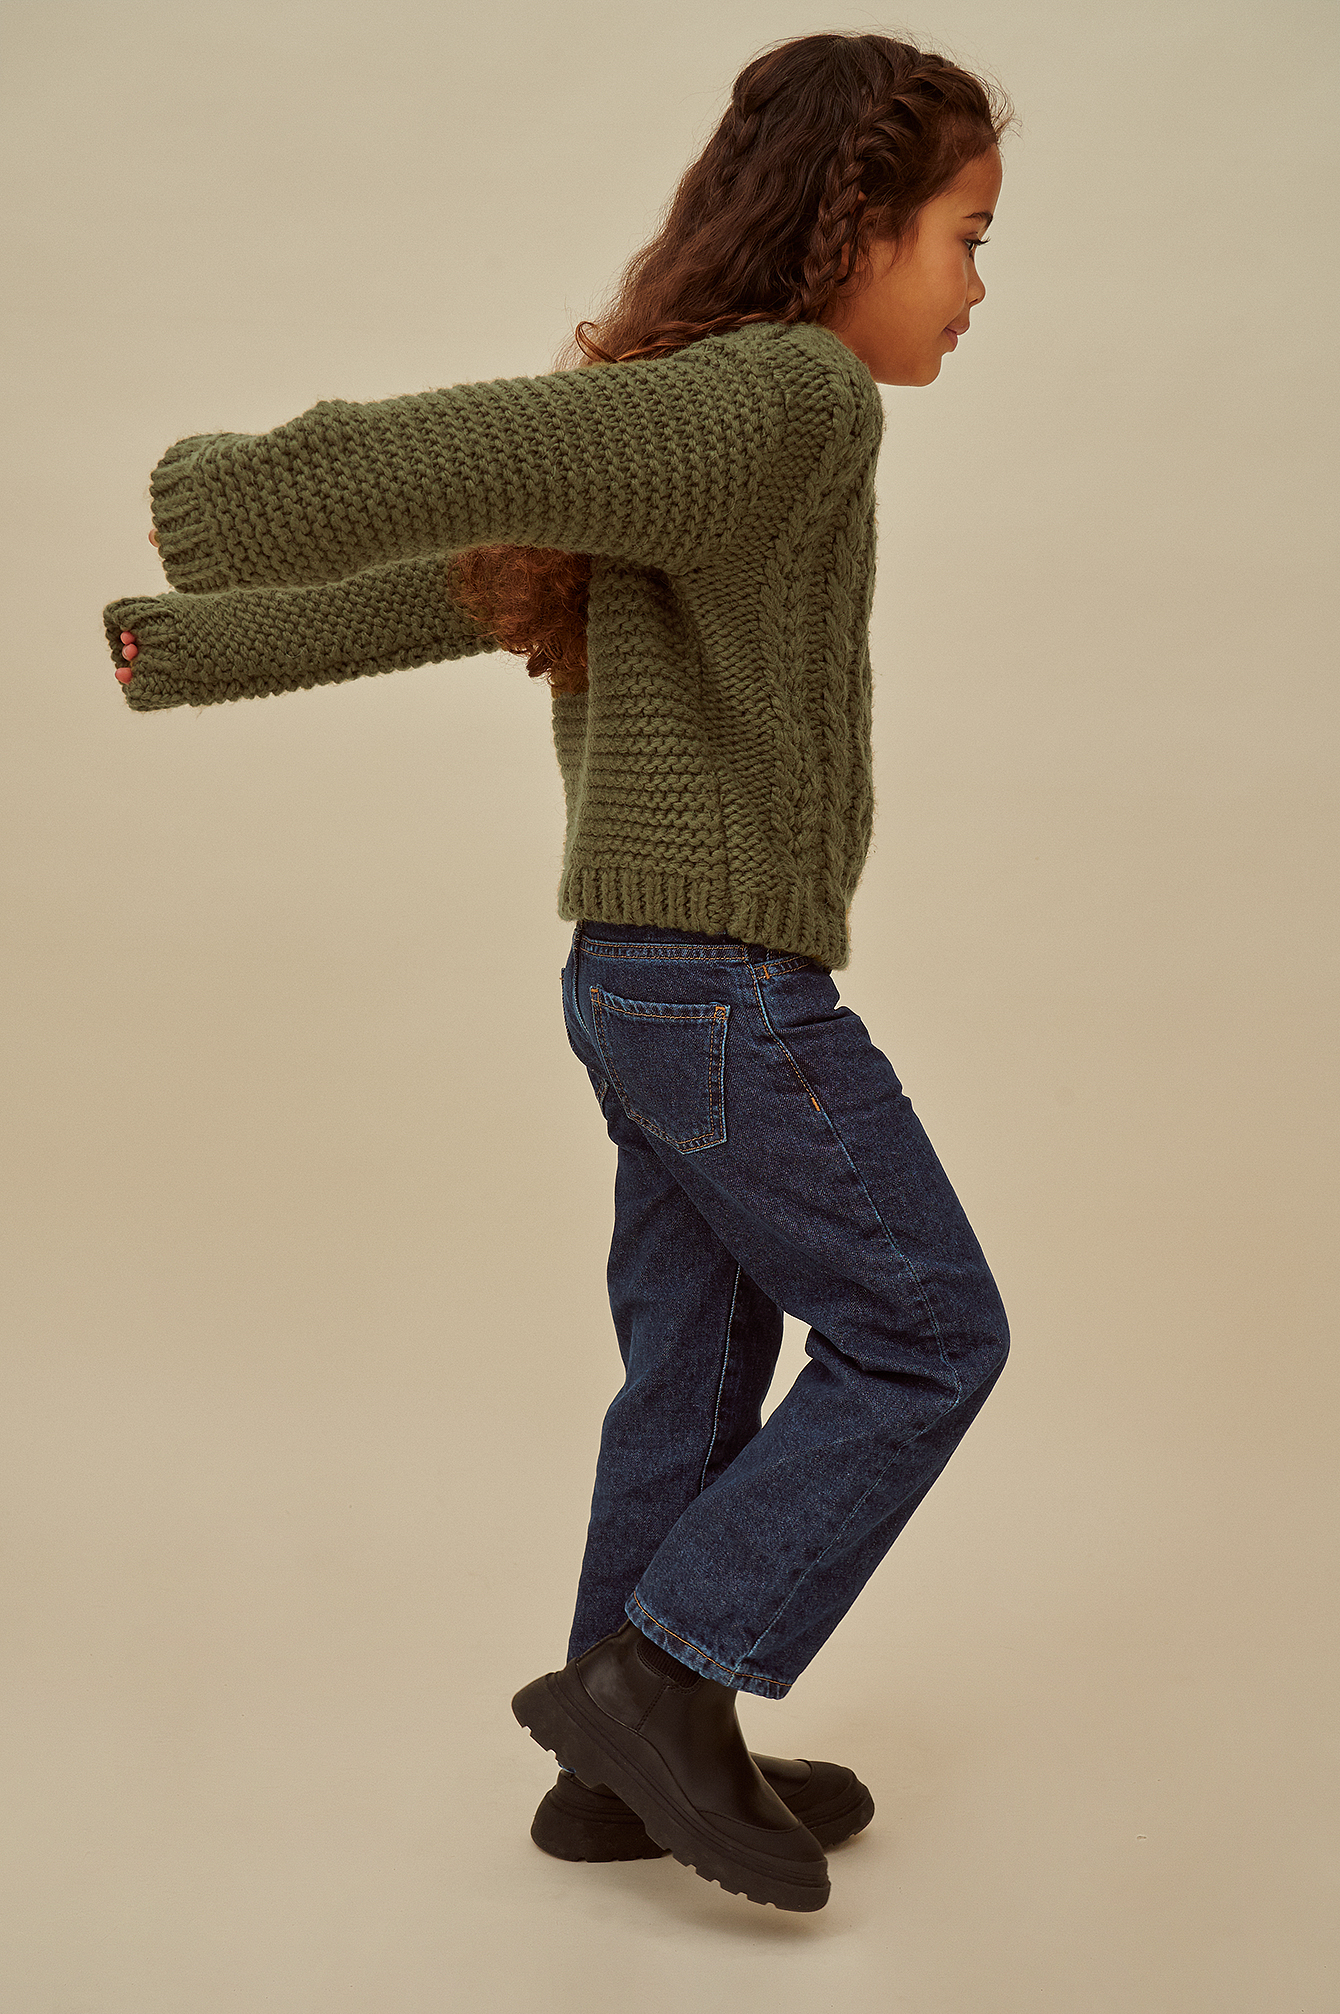 Cable Knitted Mini Sweater Outfit.